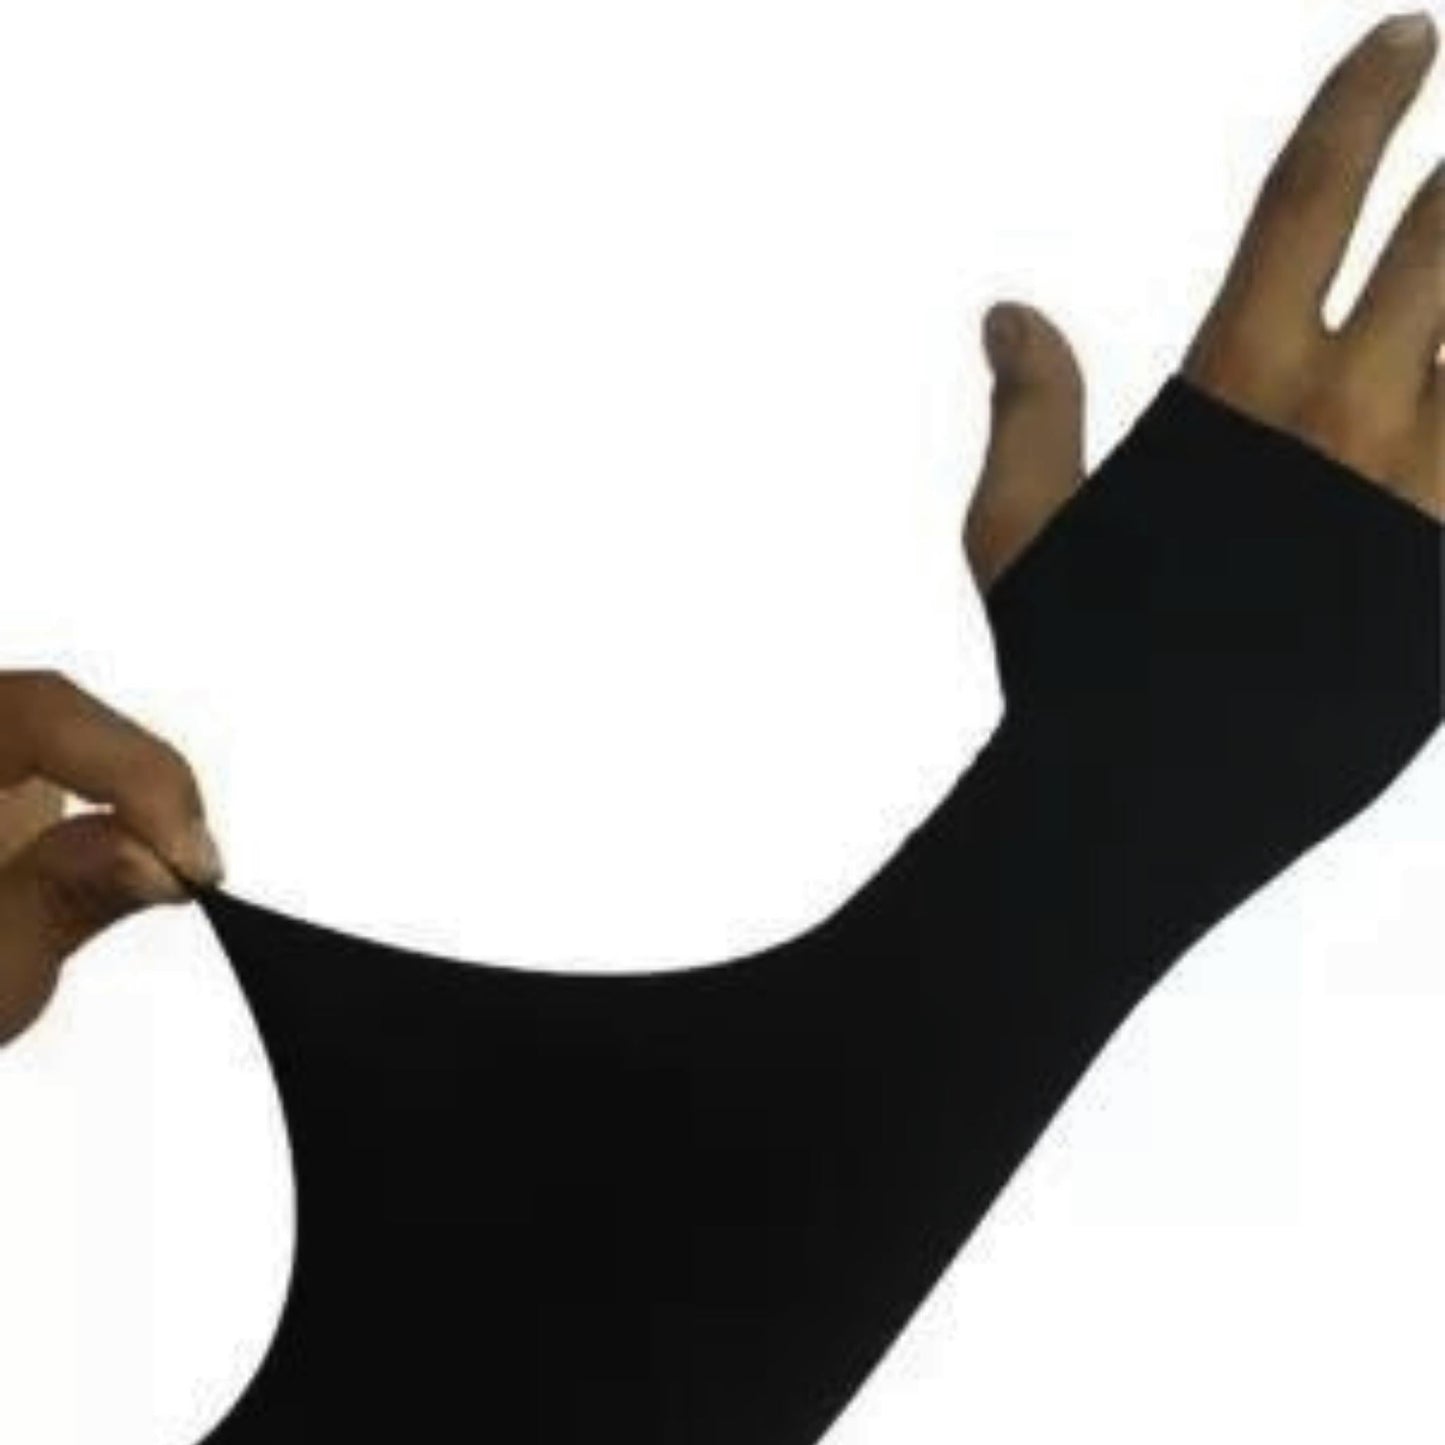 YOUTH ROBE's Men's Cotton Arm Sleeves (Let's Slim) - YOUTH ROBE